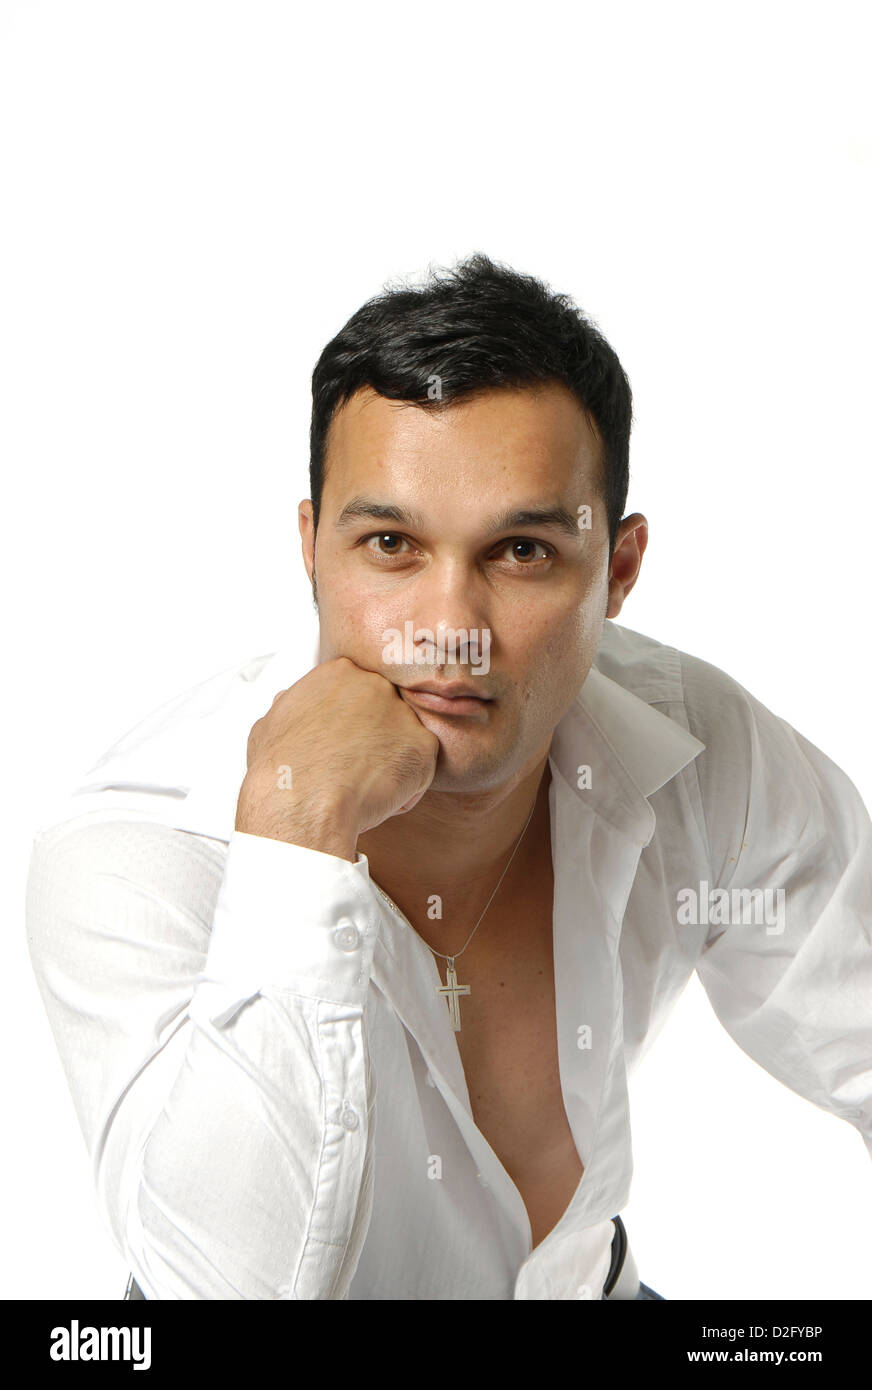 Man with open head on hand looking at camera. Casually dressed with open white shirt and long sleeves Stock Photo